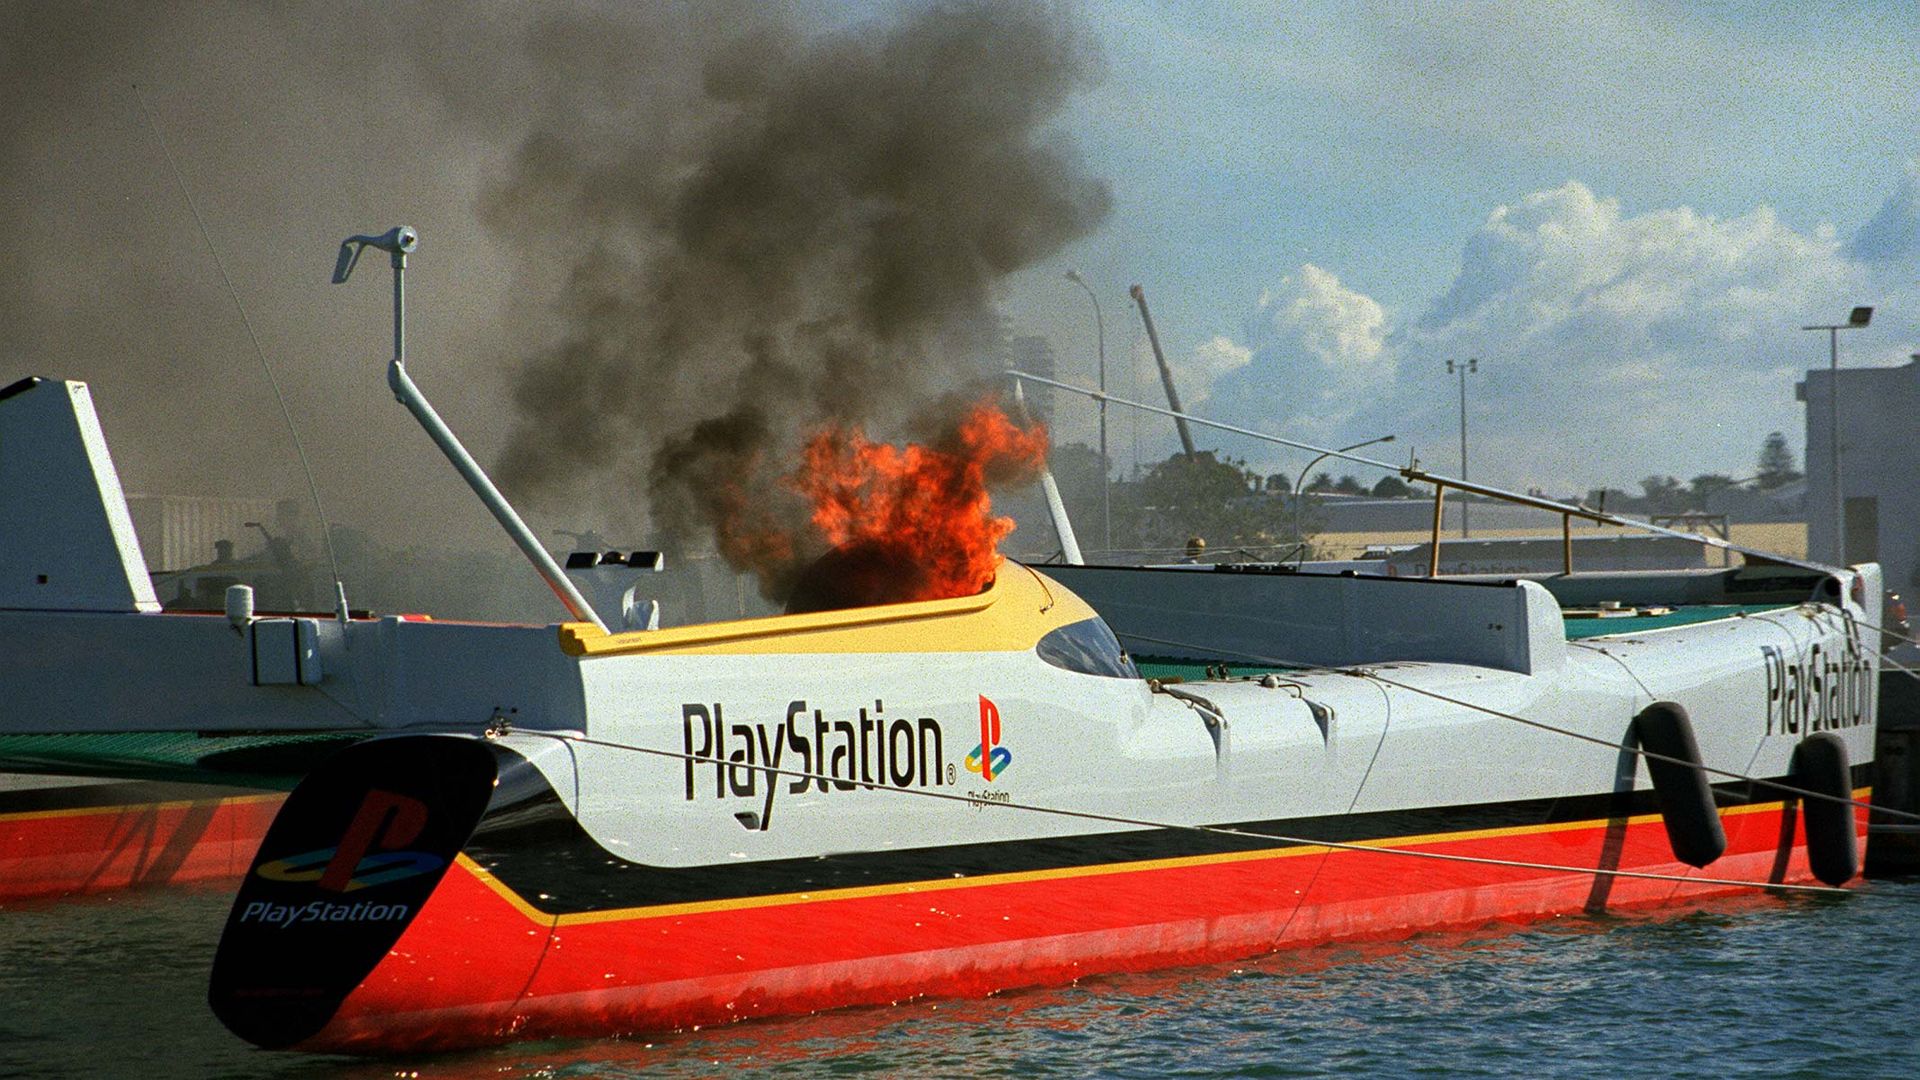 Photo of a catamaran on fire while docked in a harbor. The side of the vessel bears the PlayStation logo